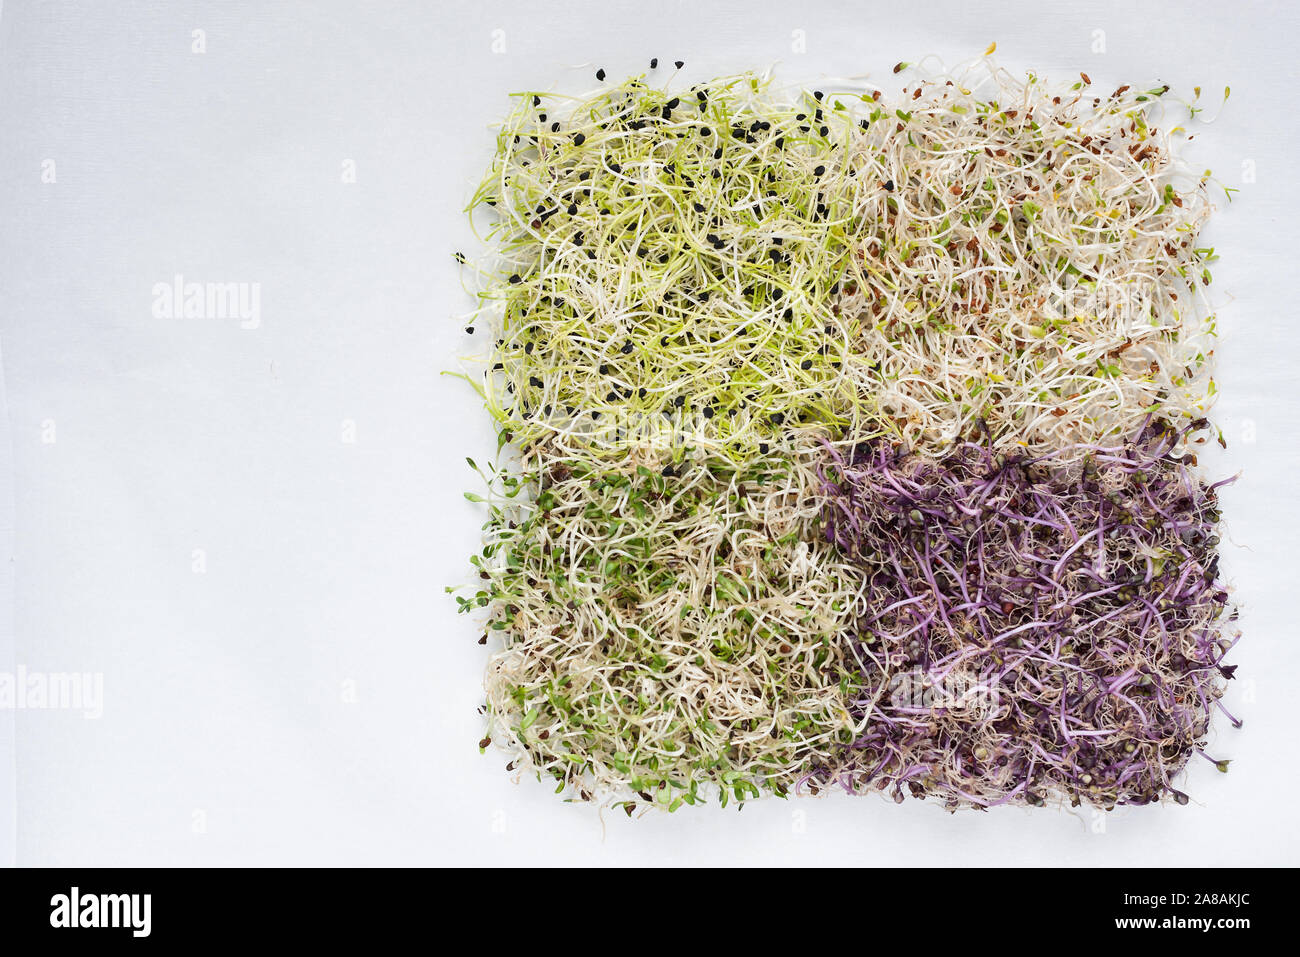 Sprouted seeds  on white background. Flat lay .Vegetable seeds for raw diet food, micro green healthy eating concept.Flat lay,horizontal. Stock Photo